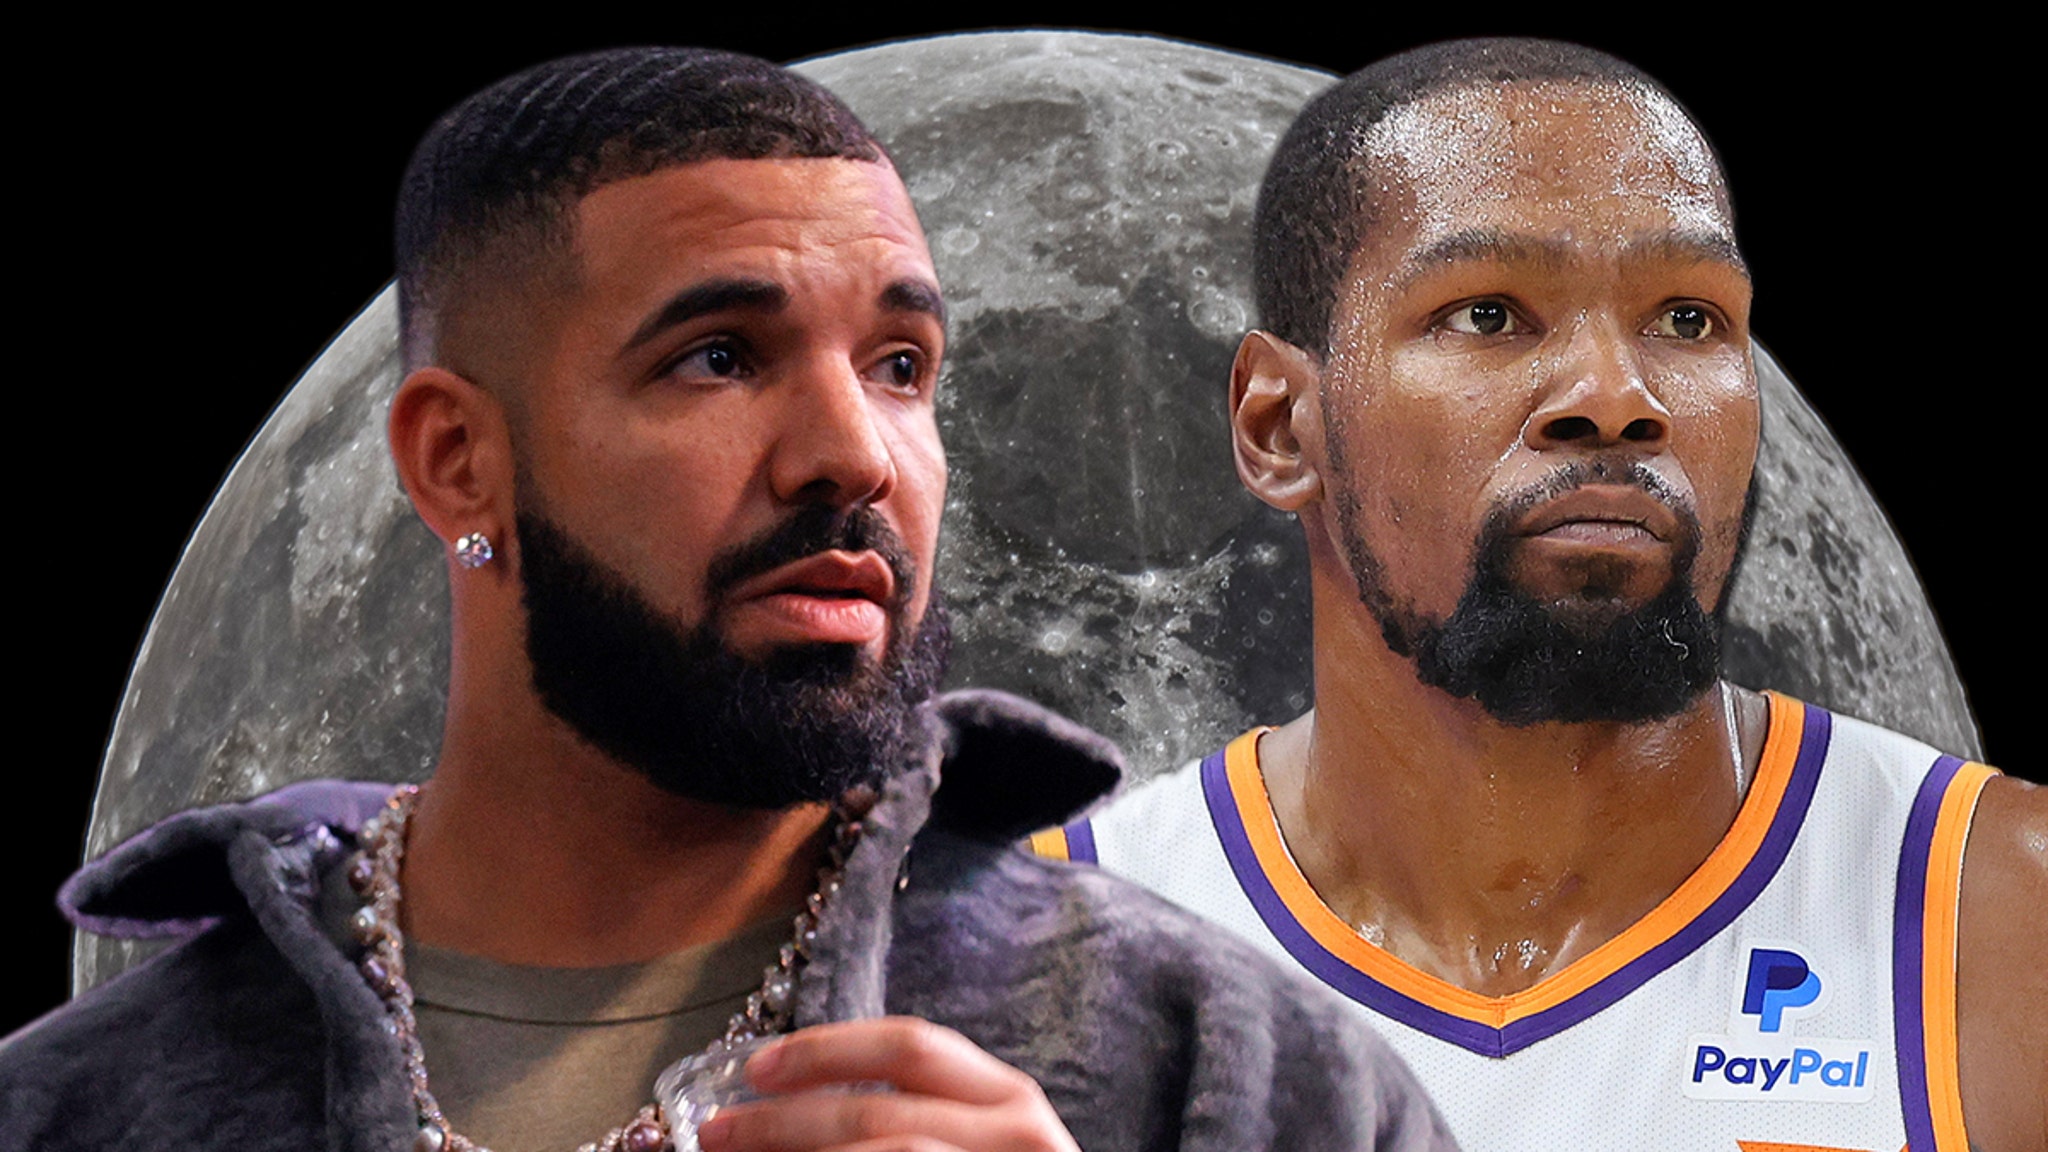 Drake Releasing ‘Scary Hours 3’ at Midnight, Kevin Durant Co-Producing